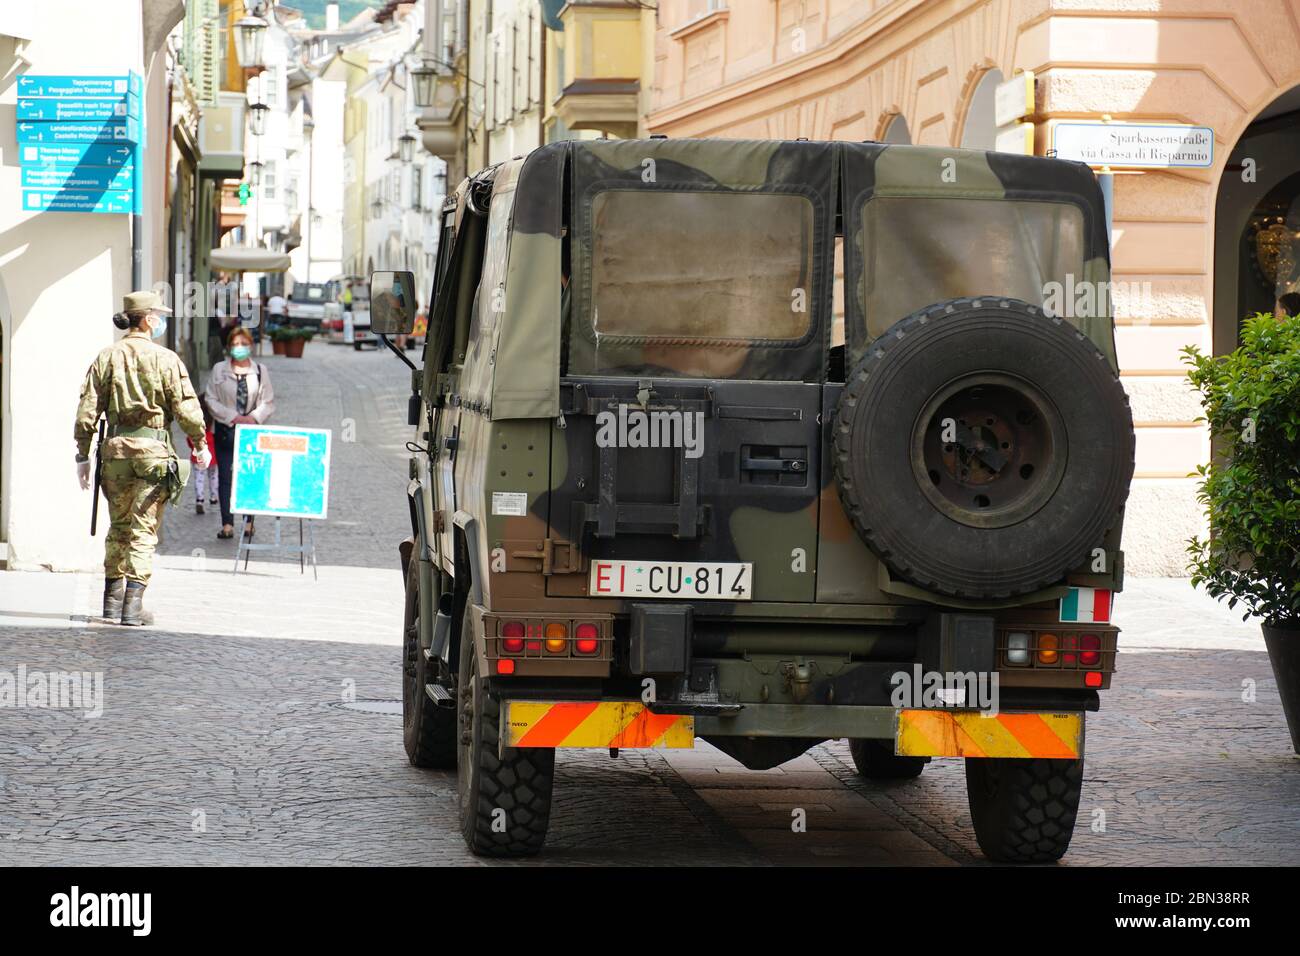 Army vehicle and walking soldiers on the street in Merano, South Tyrol, Italy, checking the city, patrolling after Italy has entered into Phase 2 Stock Photo